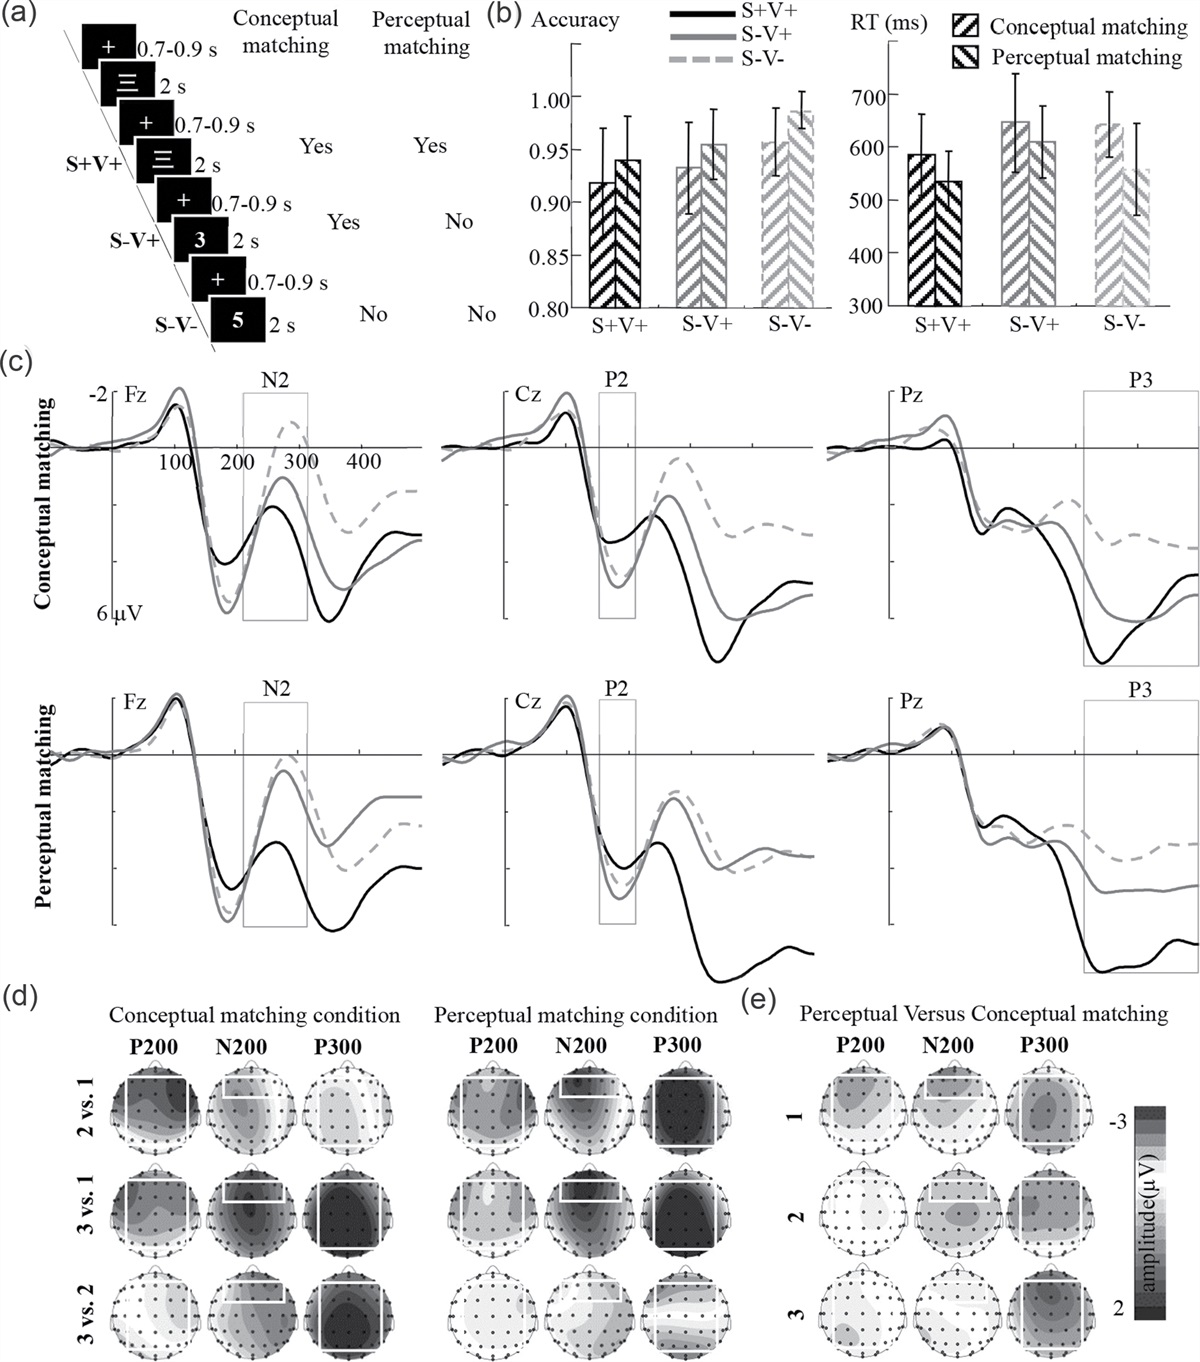 The brain responses to the gating opening mechanism on perceptual and conceptual mismatches in the 1-back matching task